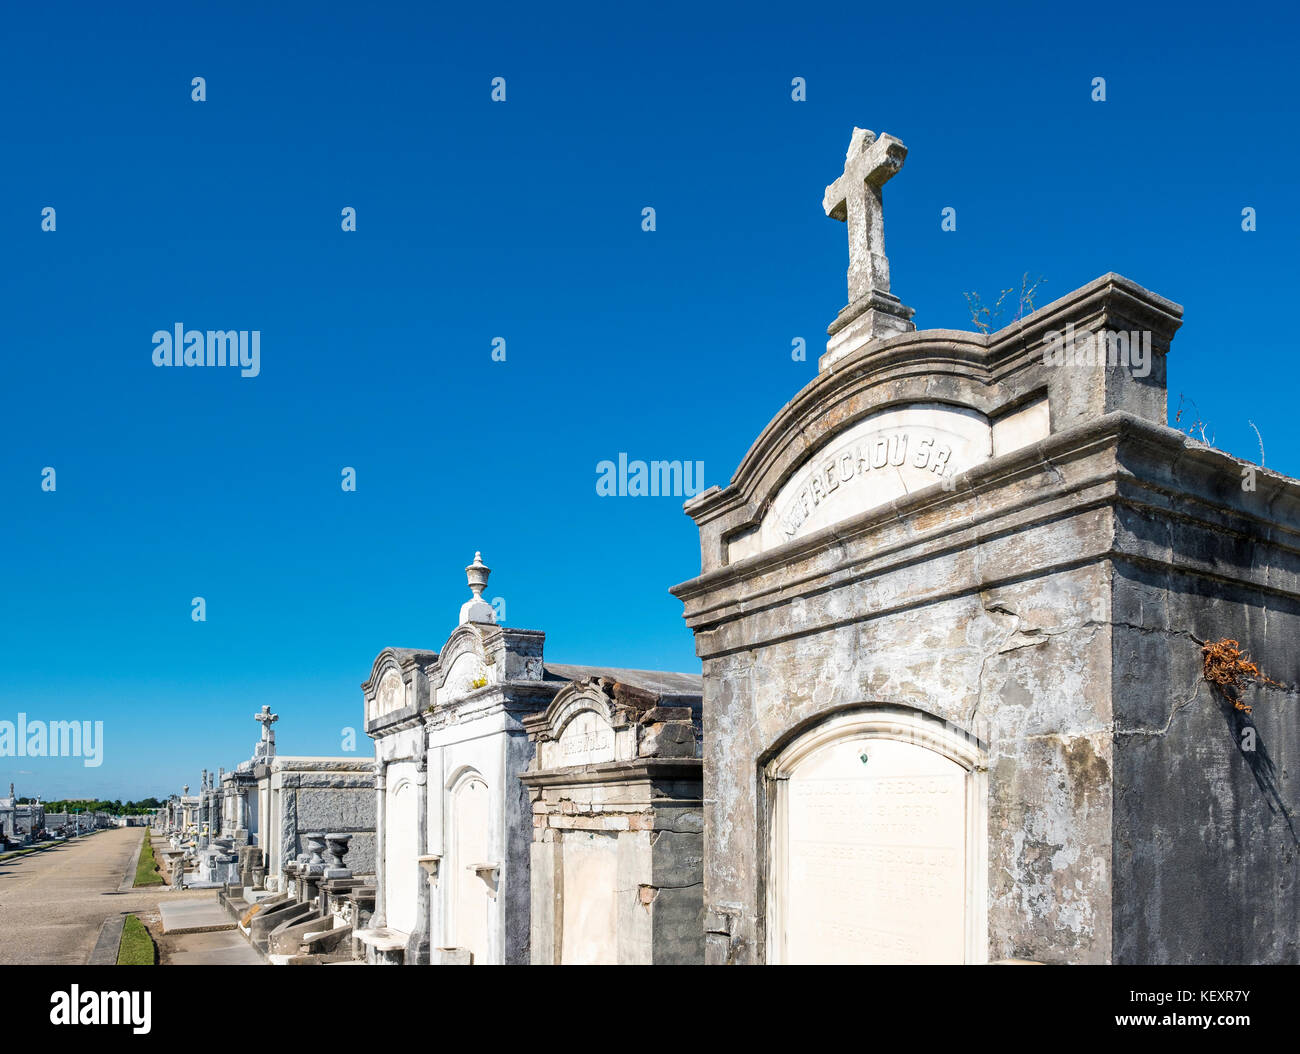 United States, Louisiana, New Orleans. Historic above-ground graves in Greenwood Cemetery. Stock Photo